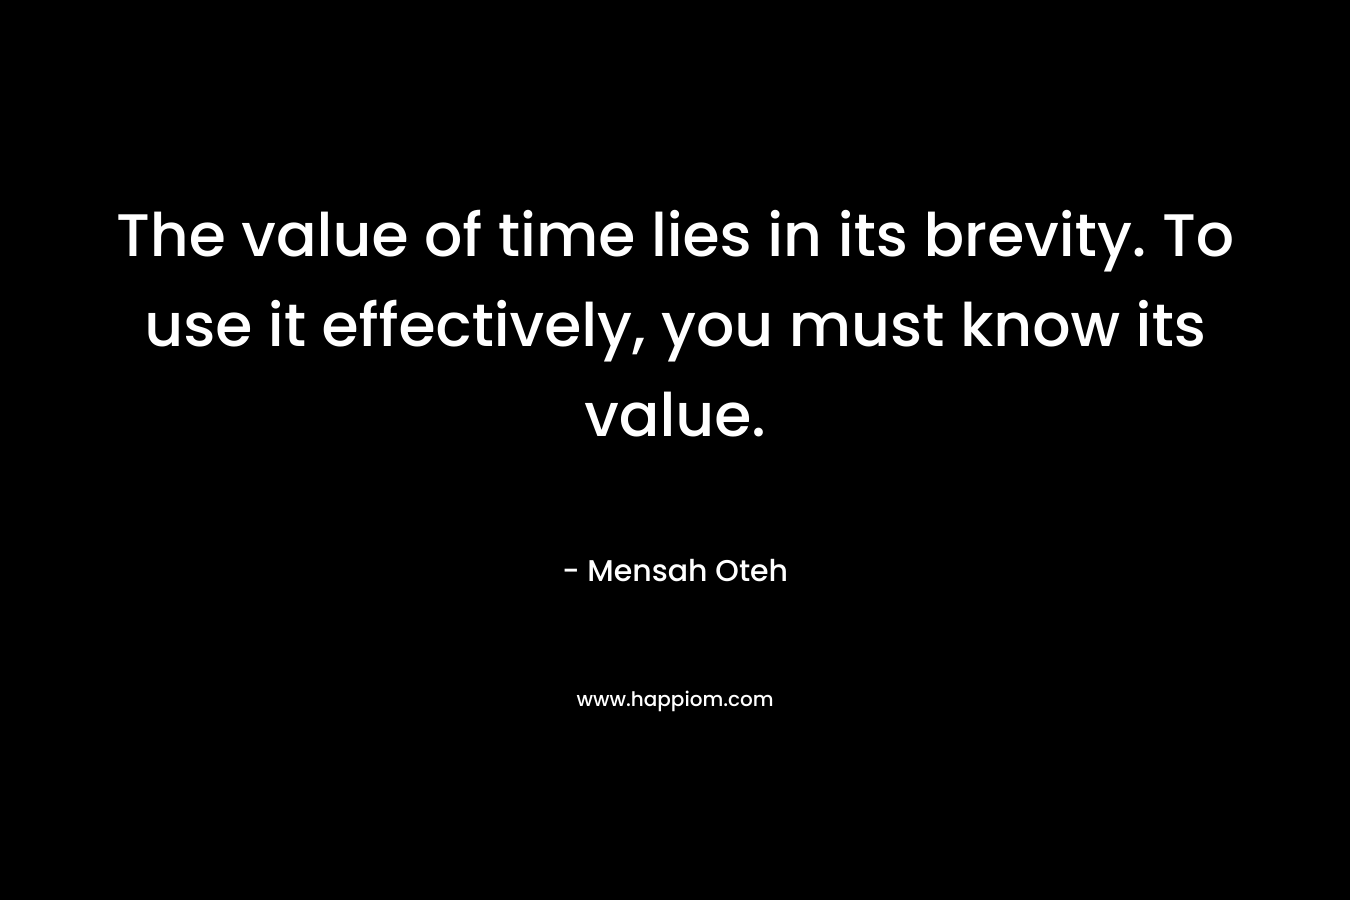 The value of time lies in its brevity. To use it effectively, you must know its value.